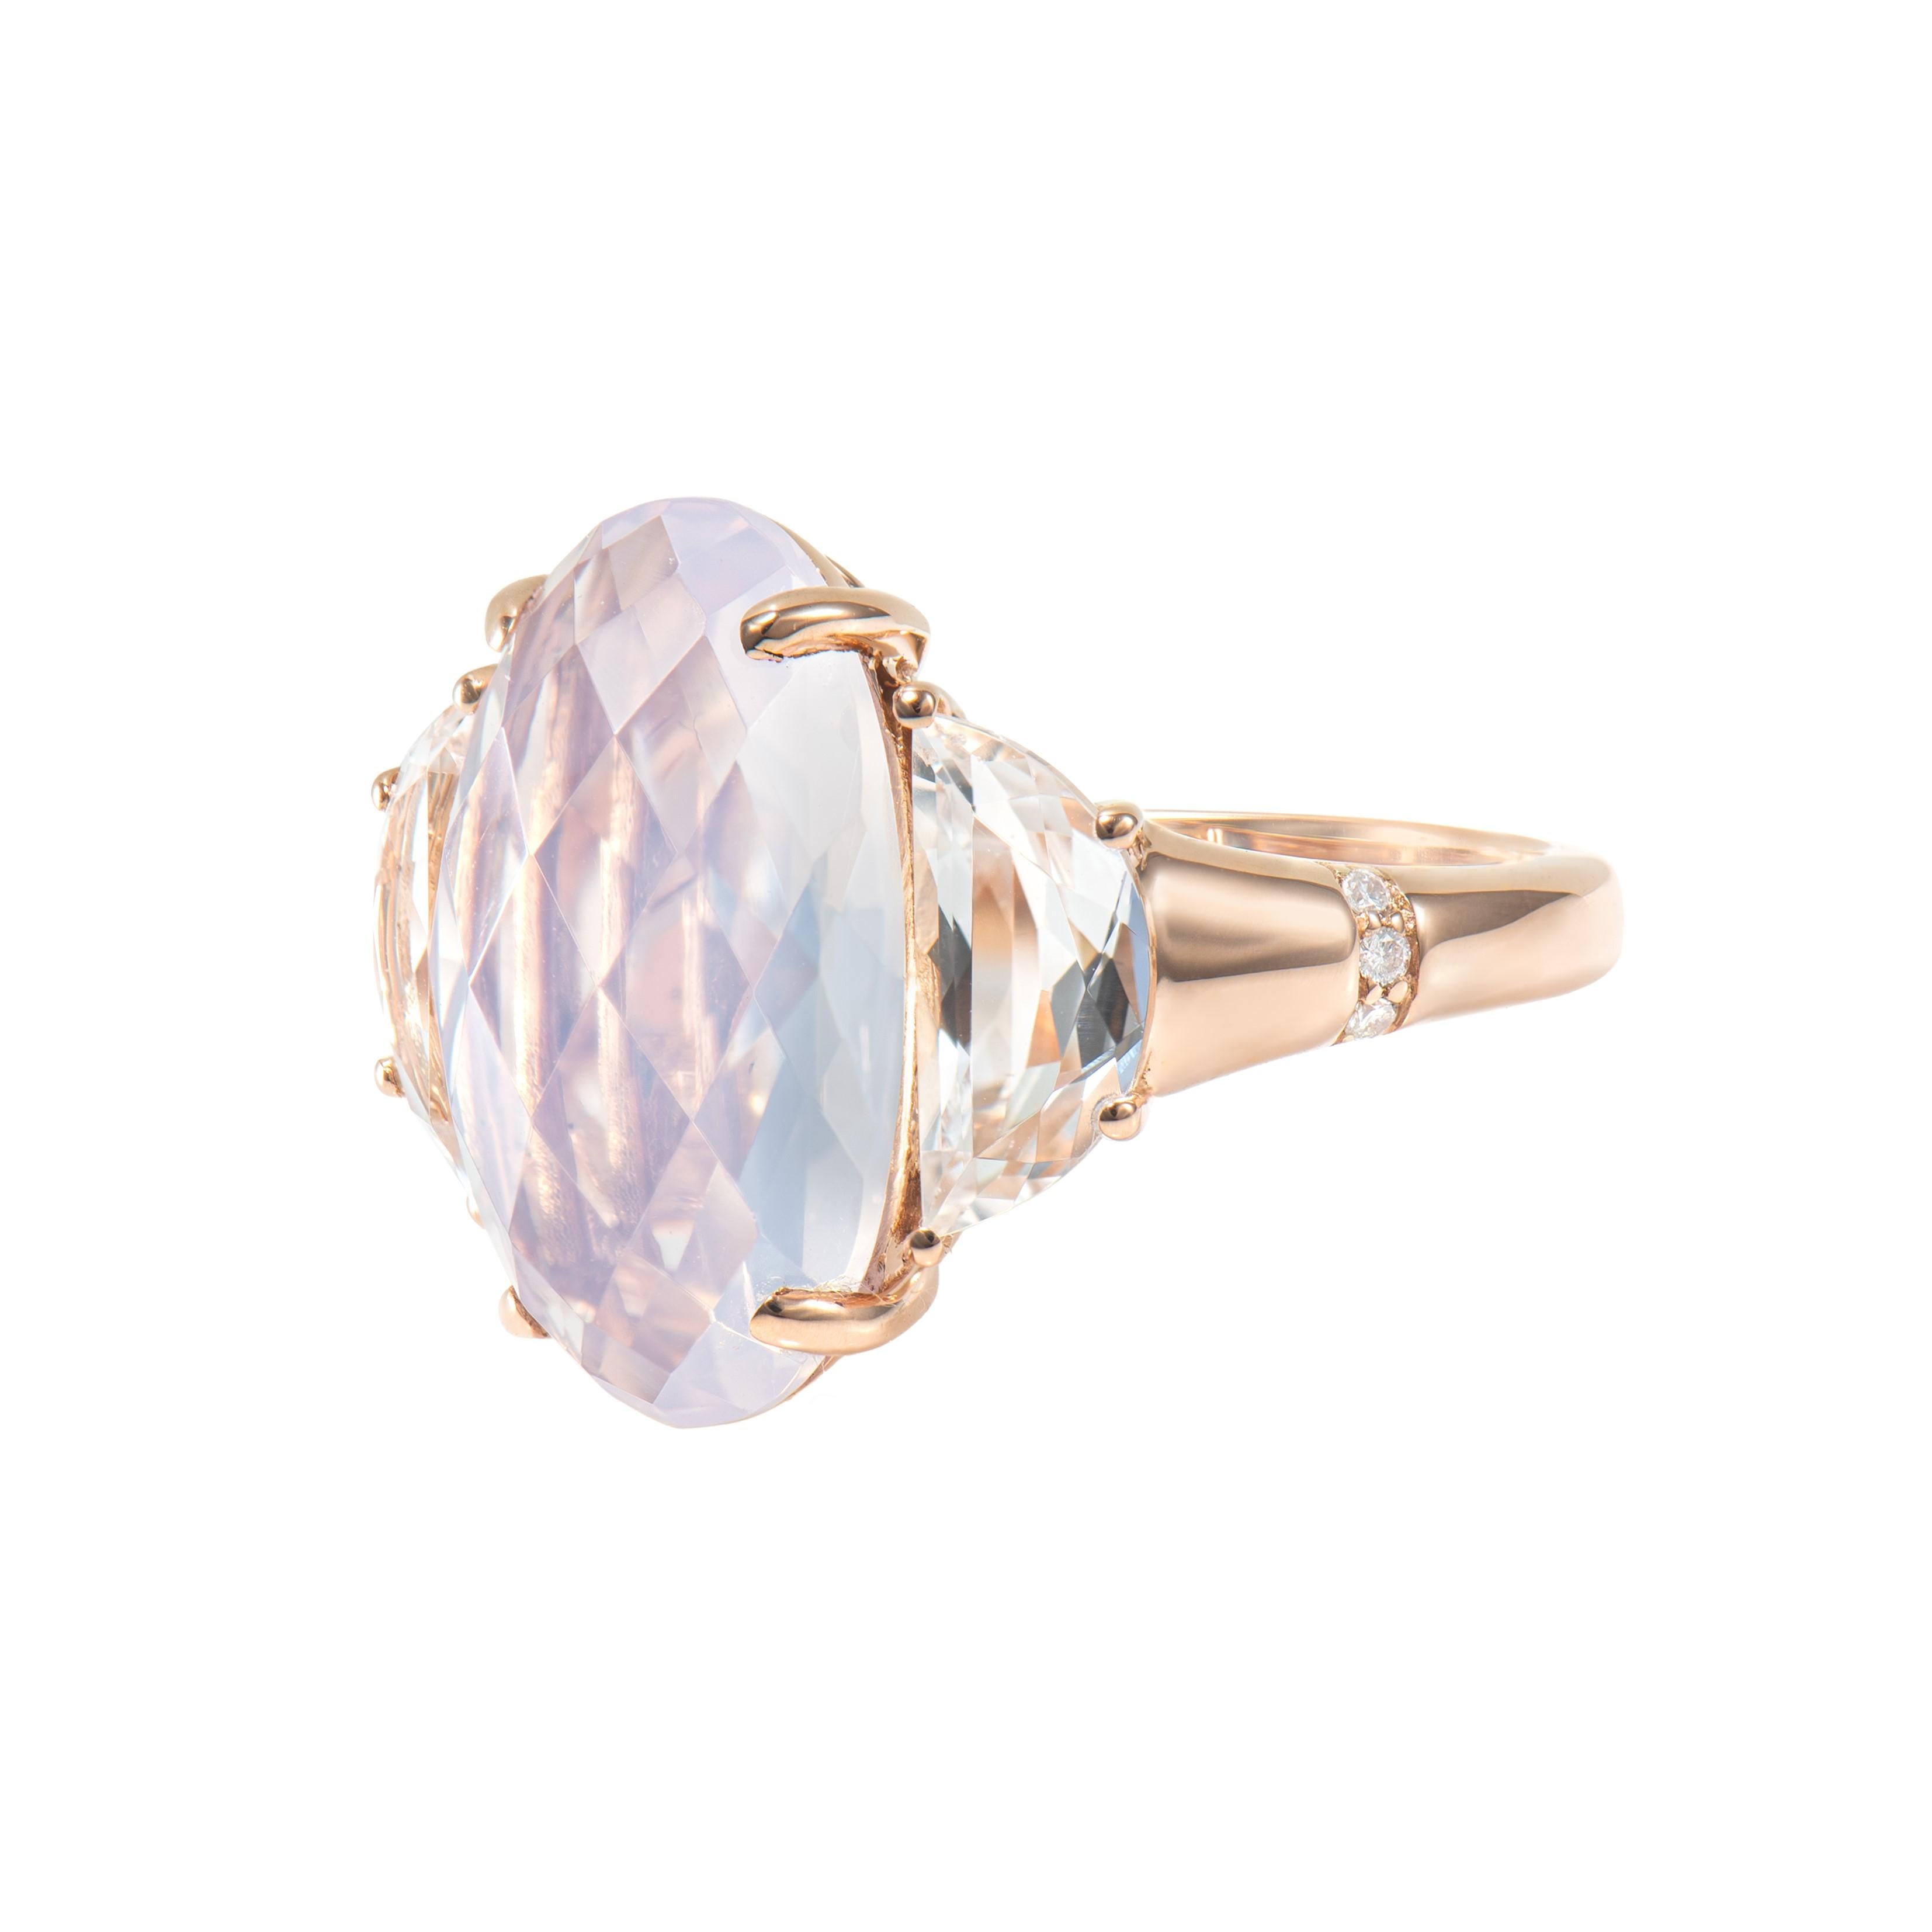 Oval Cut 5.29 Carat Lavender Quartz Antique Ring in 18KRG with White Topaz and Diamond. For Sale